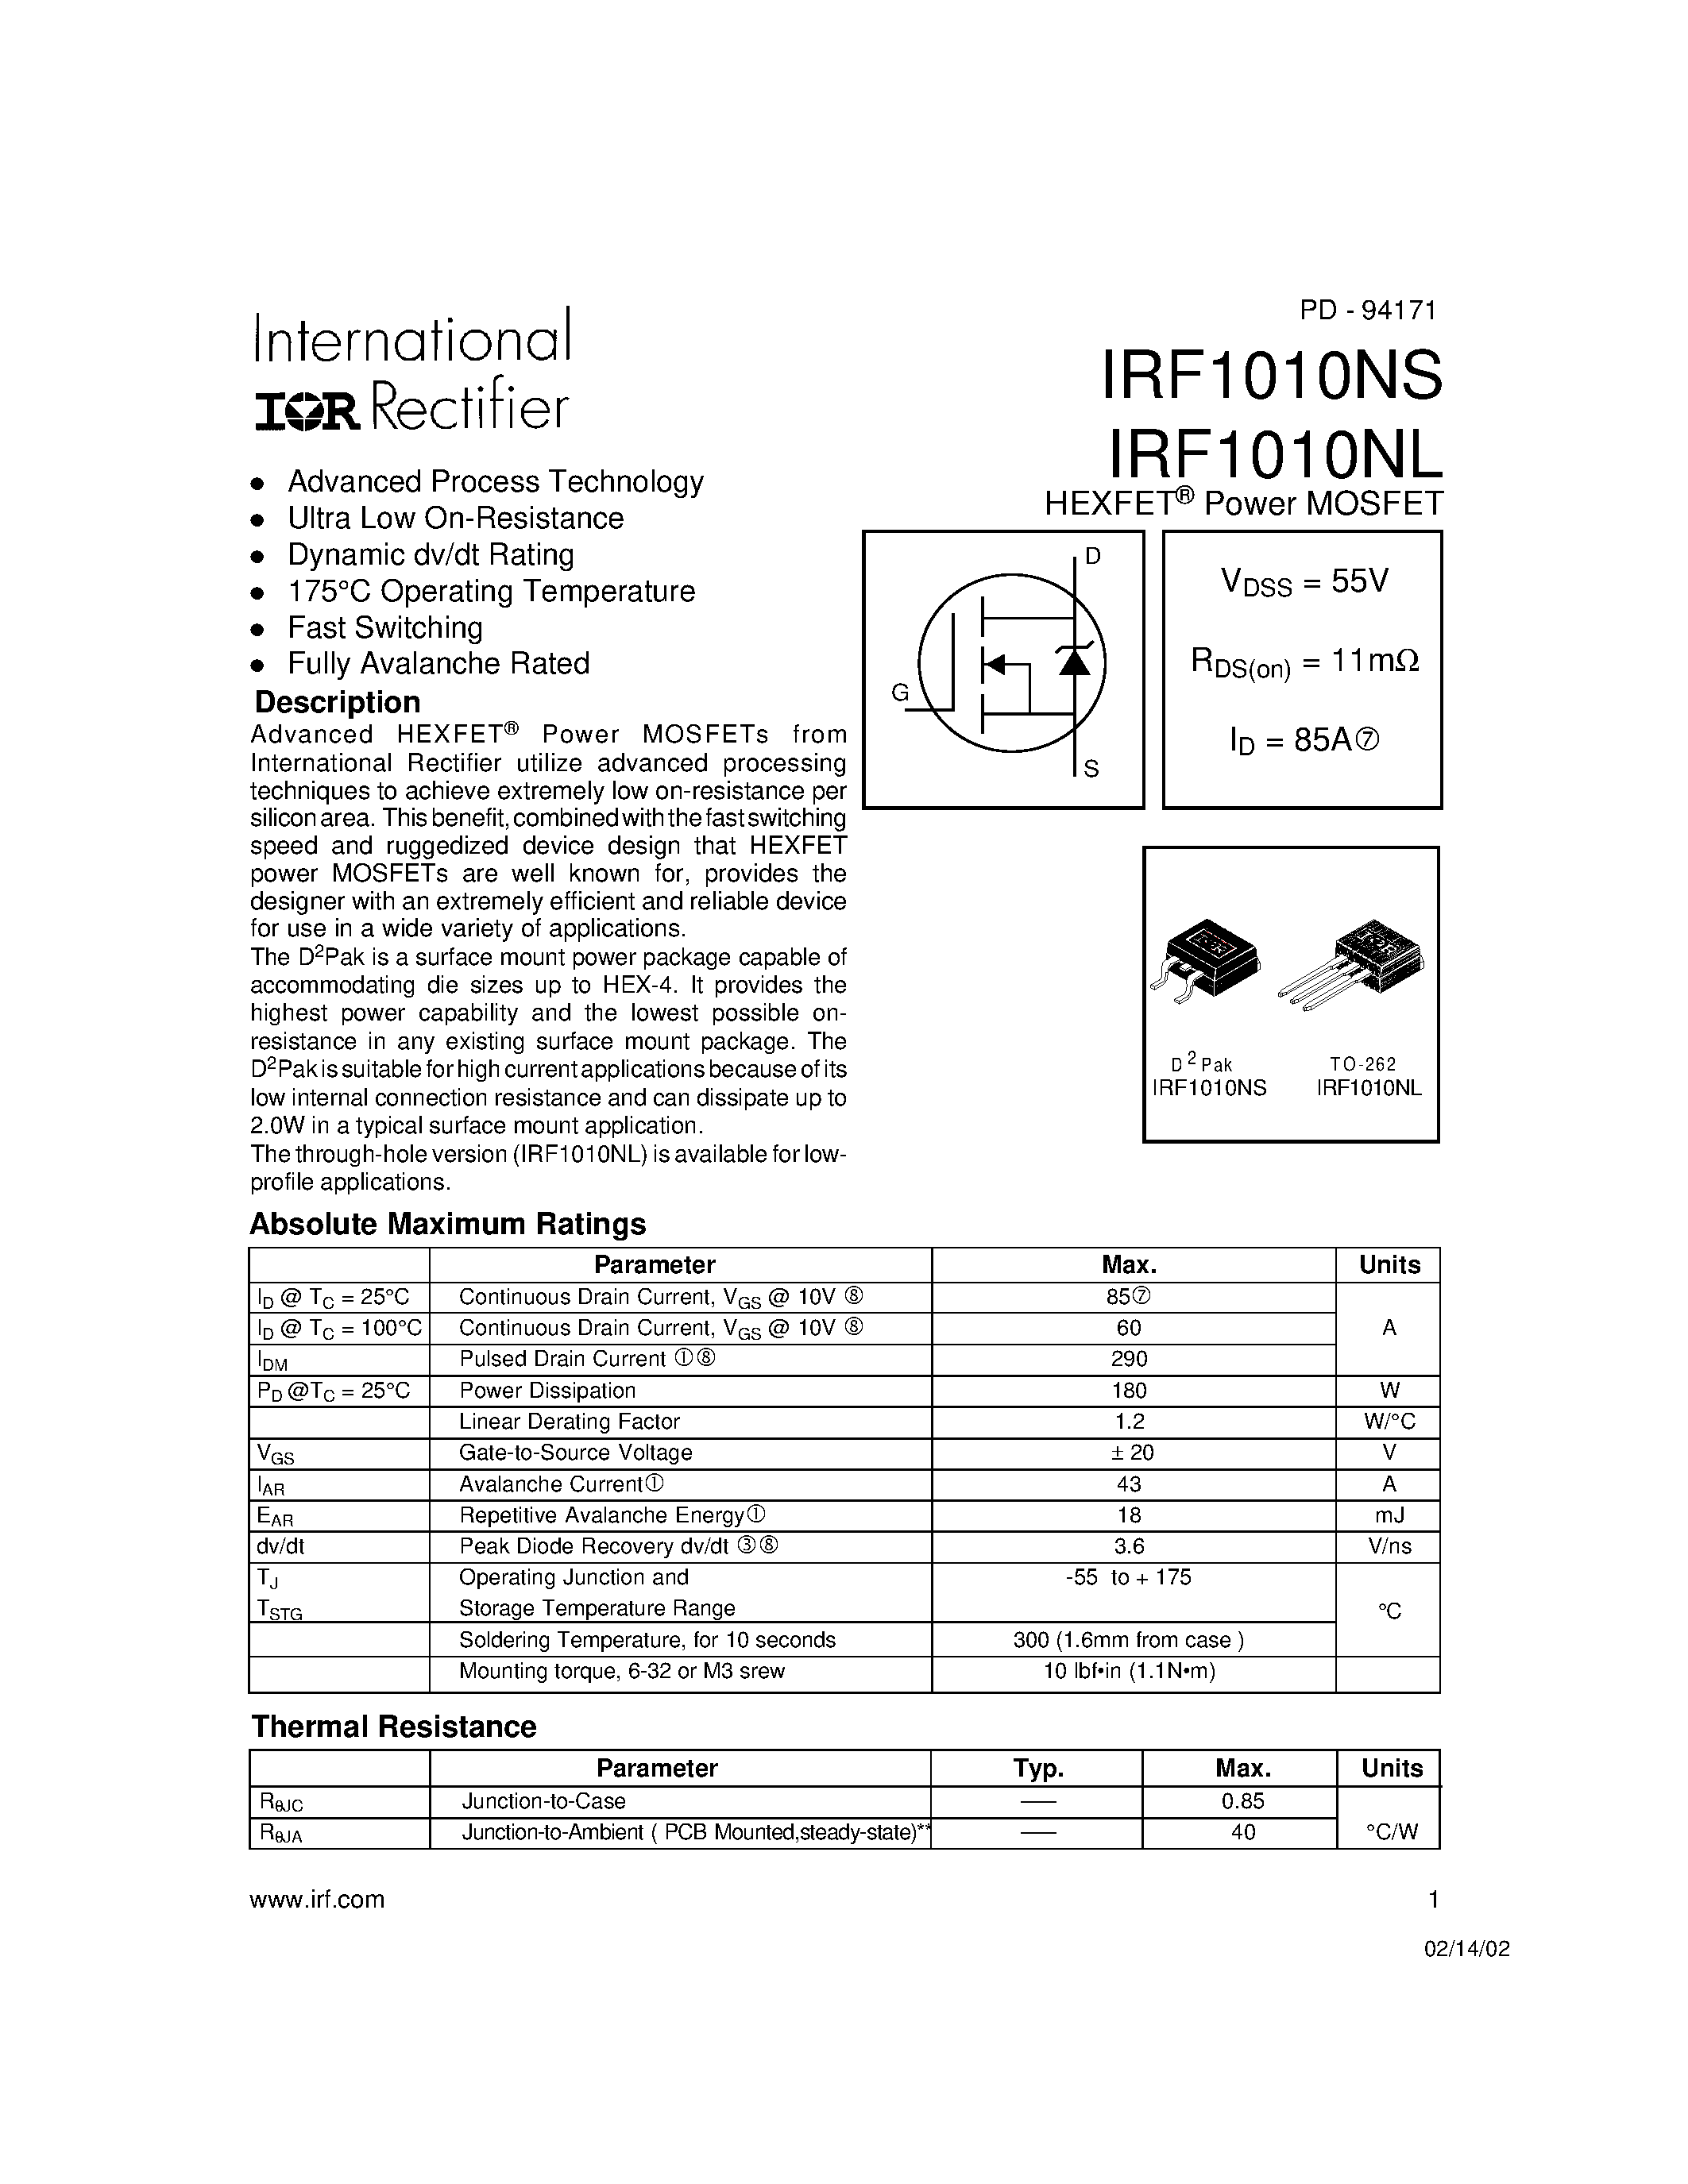 Datasheet IRF1010NL - Power MOSFET(Vdss = 55 V/ Rds(on)=11mohm/ Id=85A) page 1